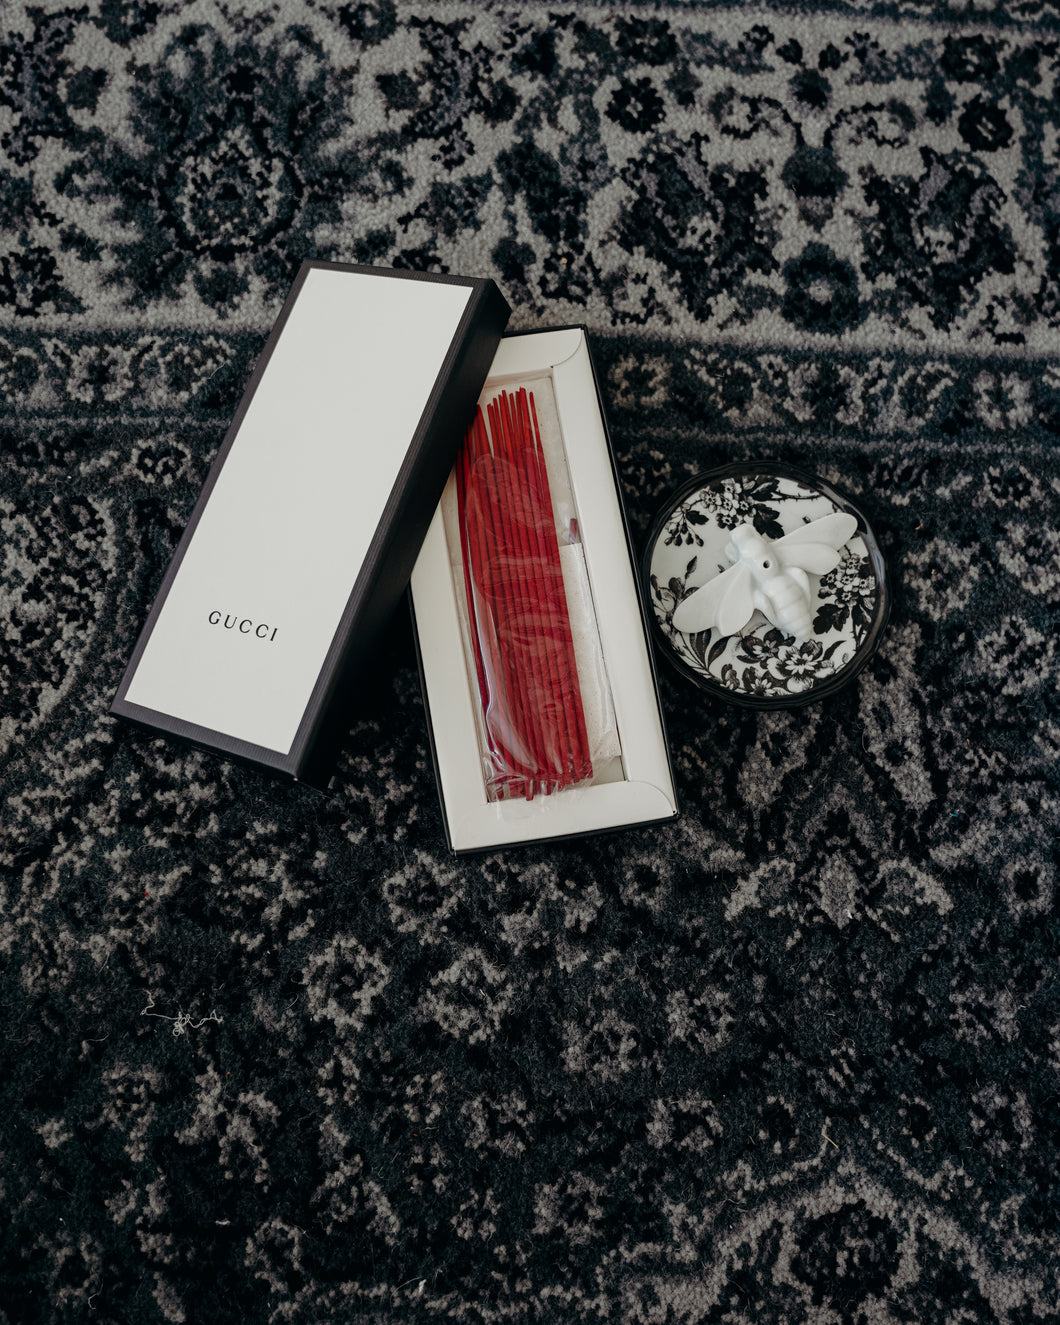 GUCCI Incense Holder and Incense